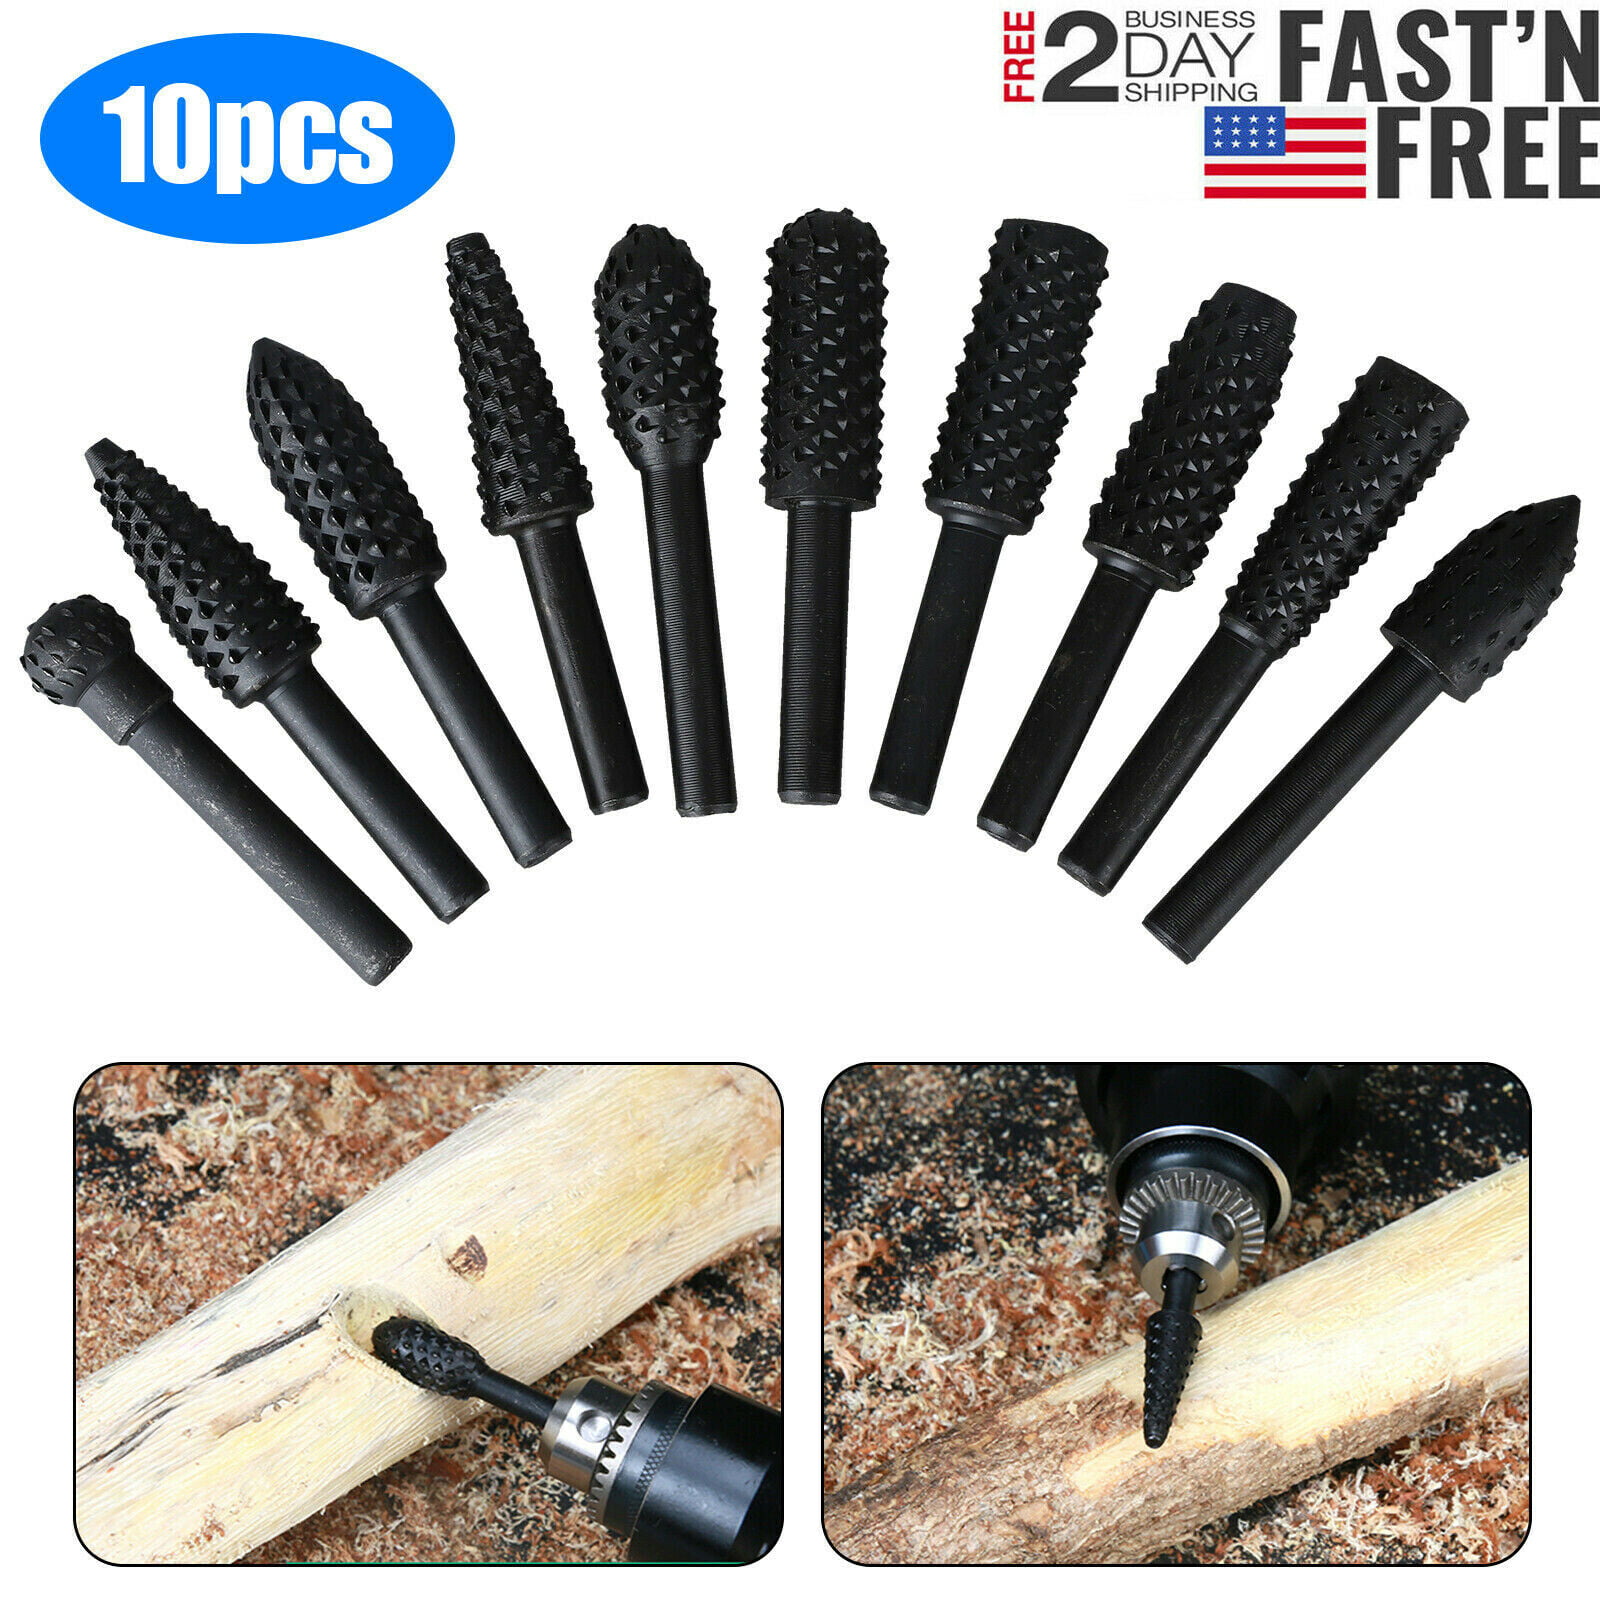 10x Wood Milling Cutter Tool Carving Rasp Rotary File Burrs Bit Woodworking Set 